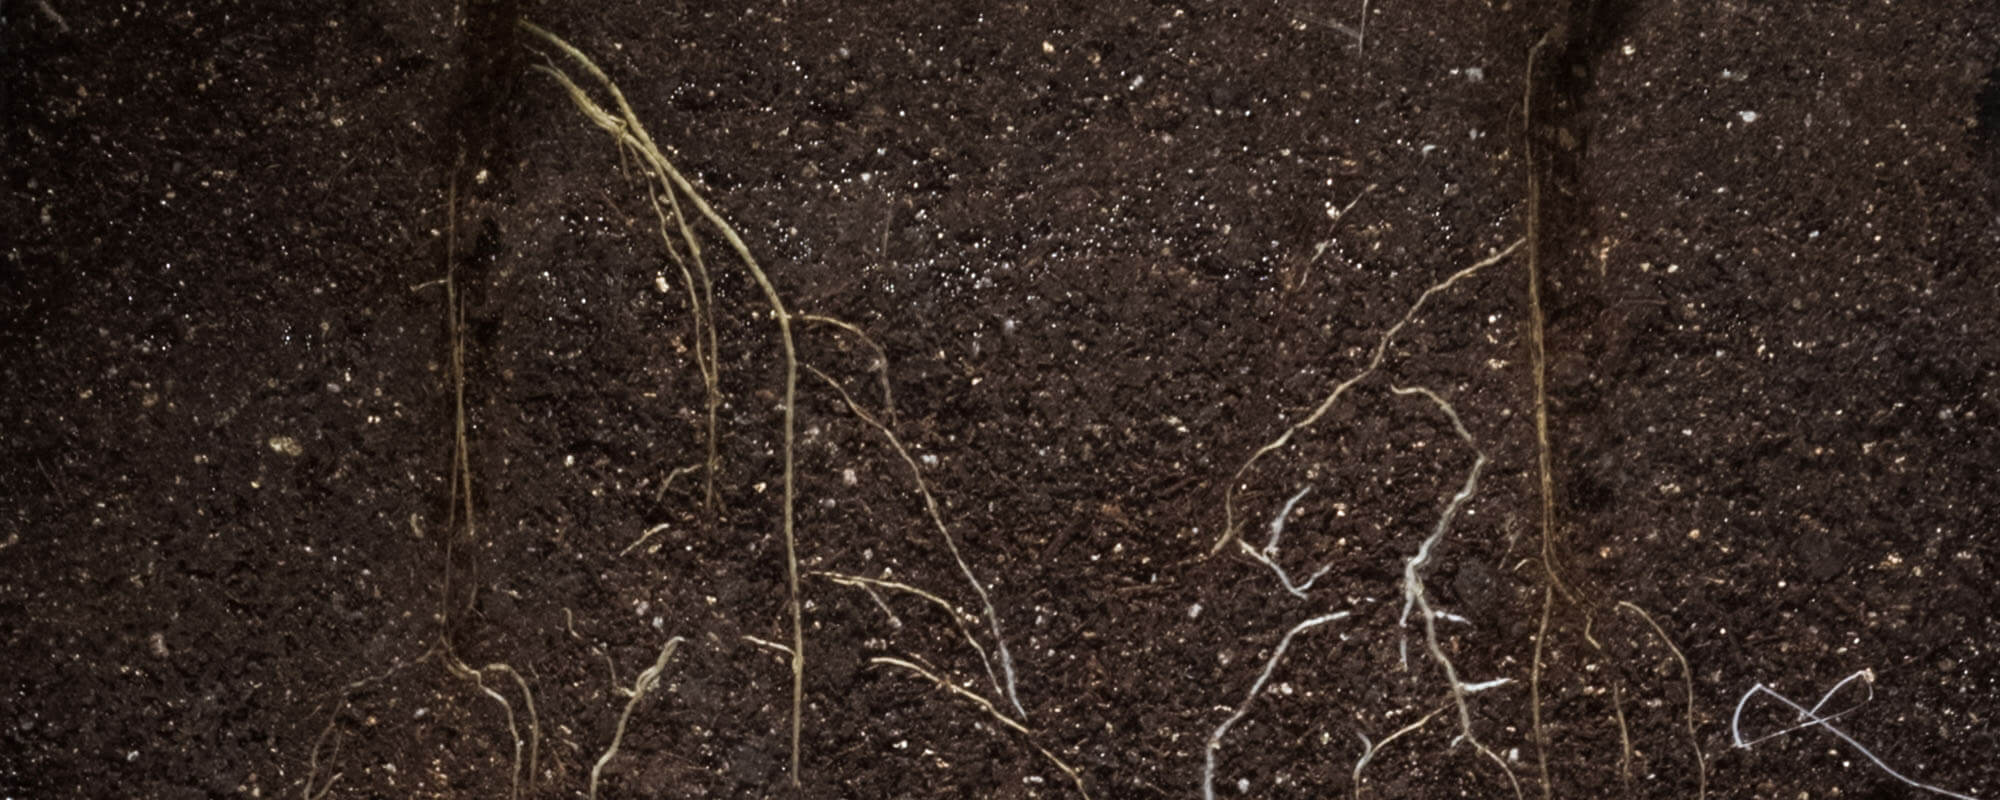 Organic matter serves important role in soil health